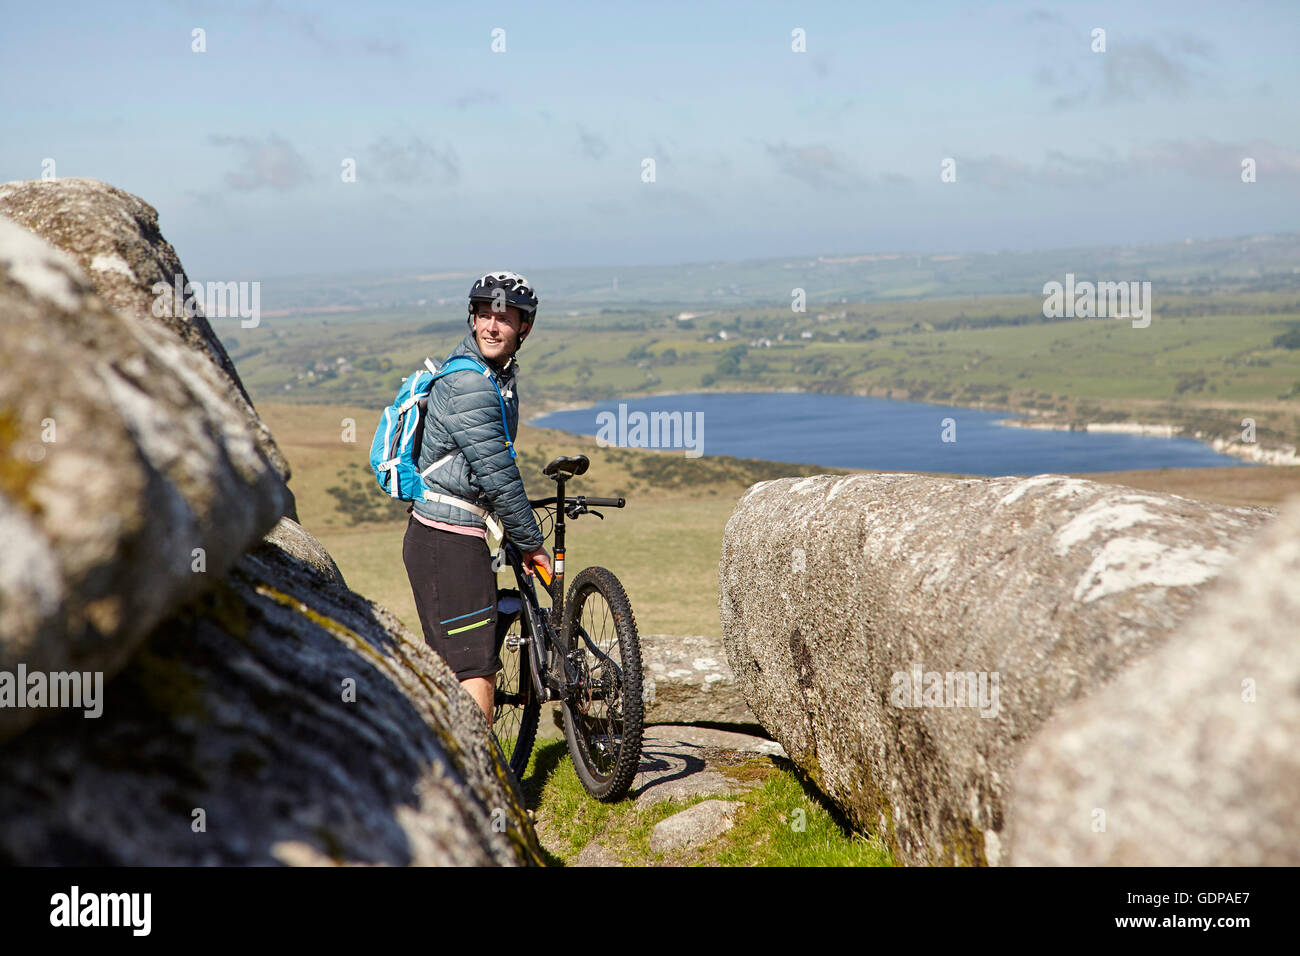 Cyclist with bicycle on rocky outcrop Stock Photo